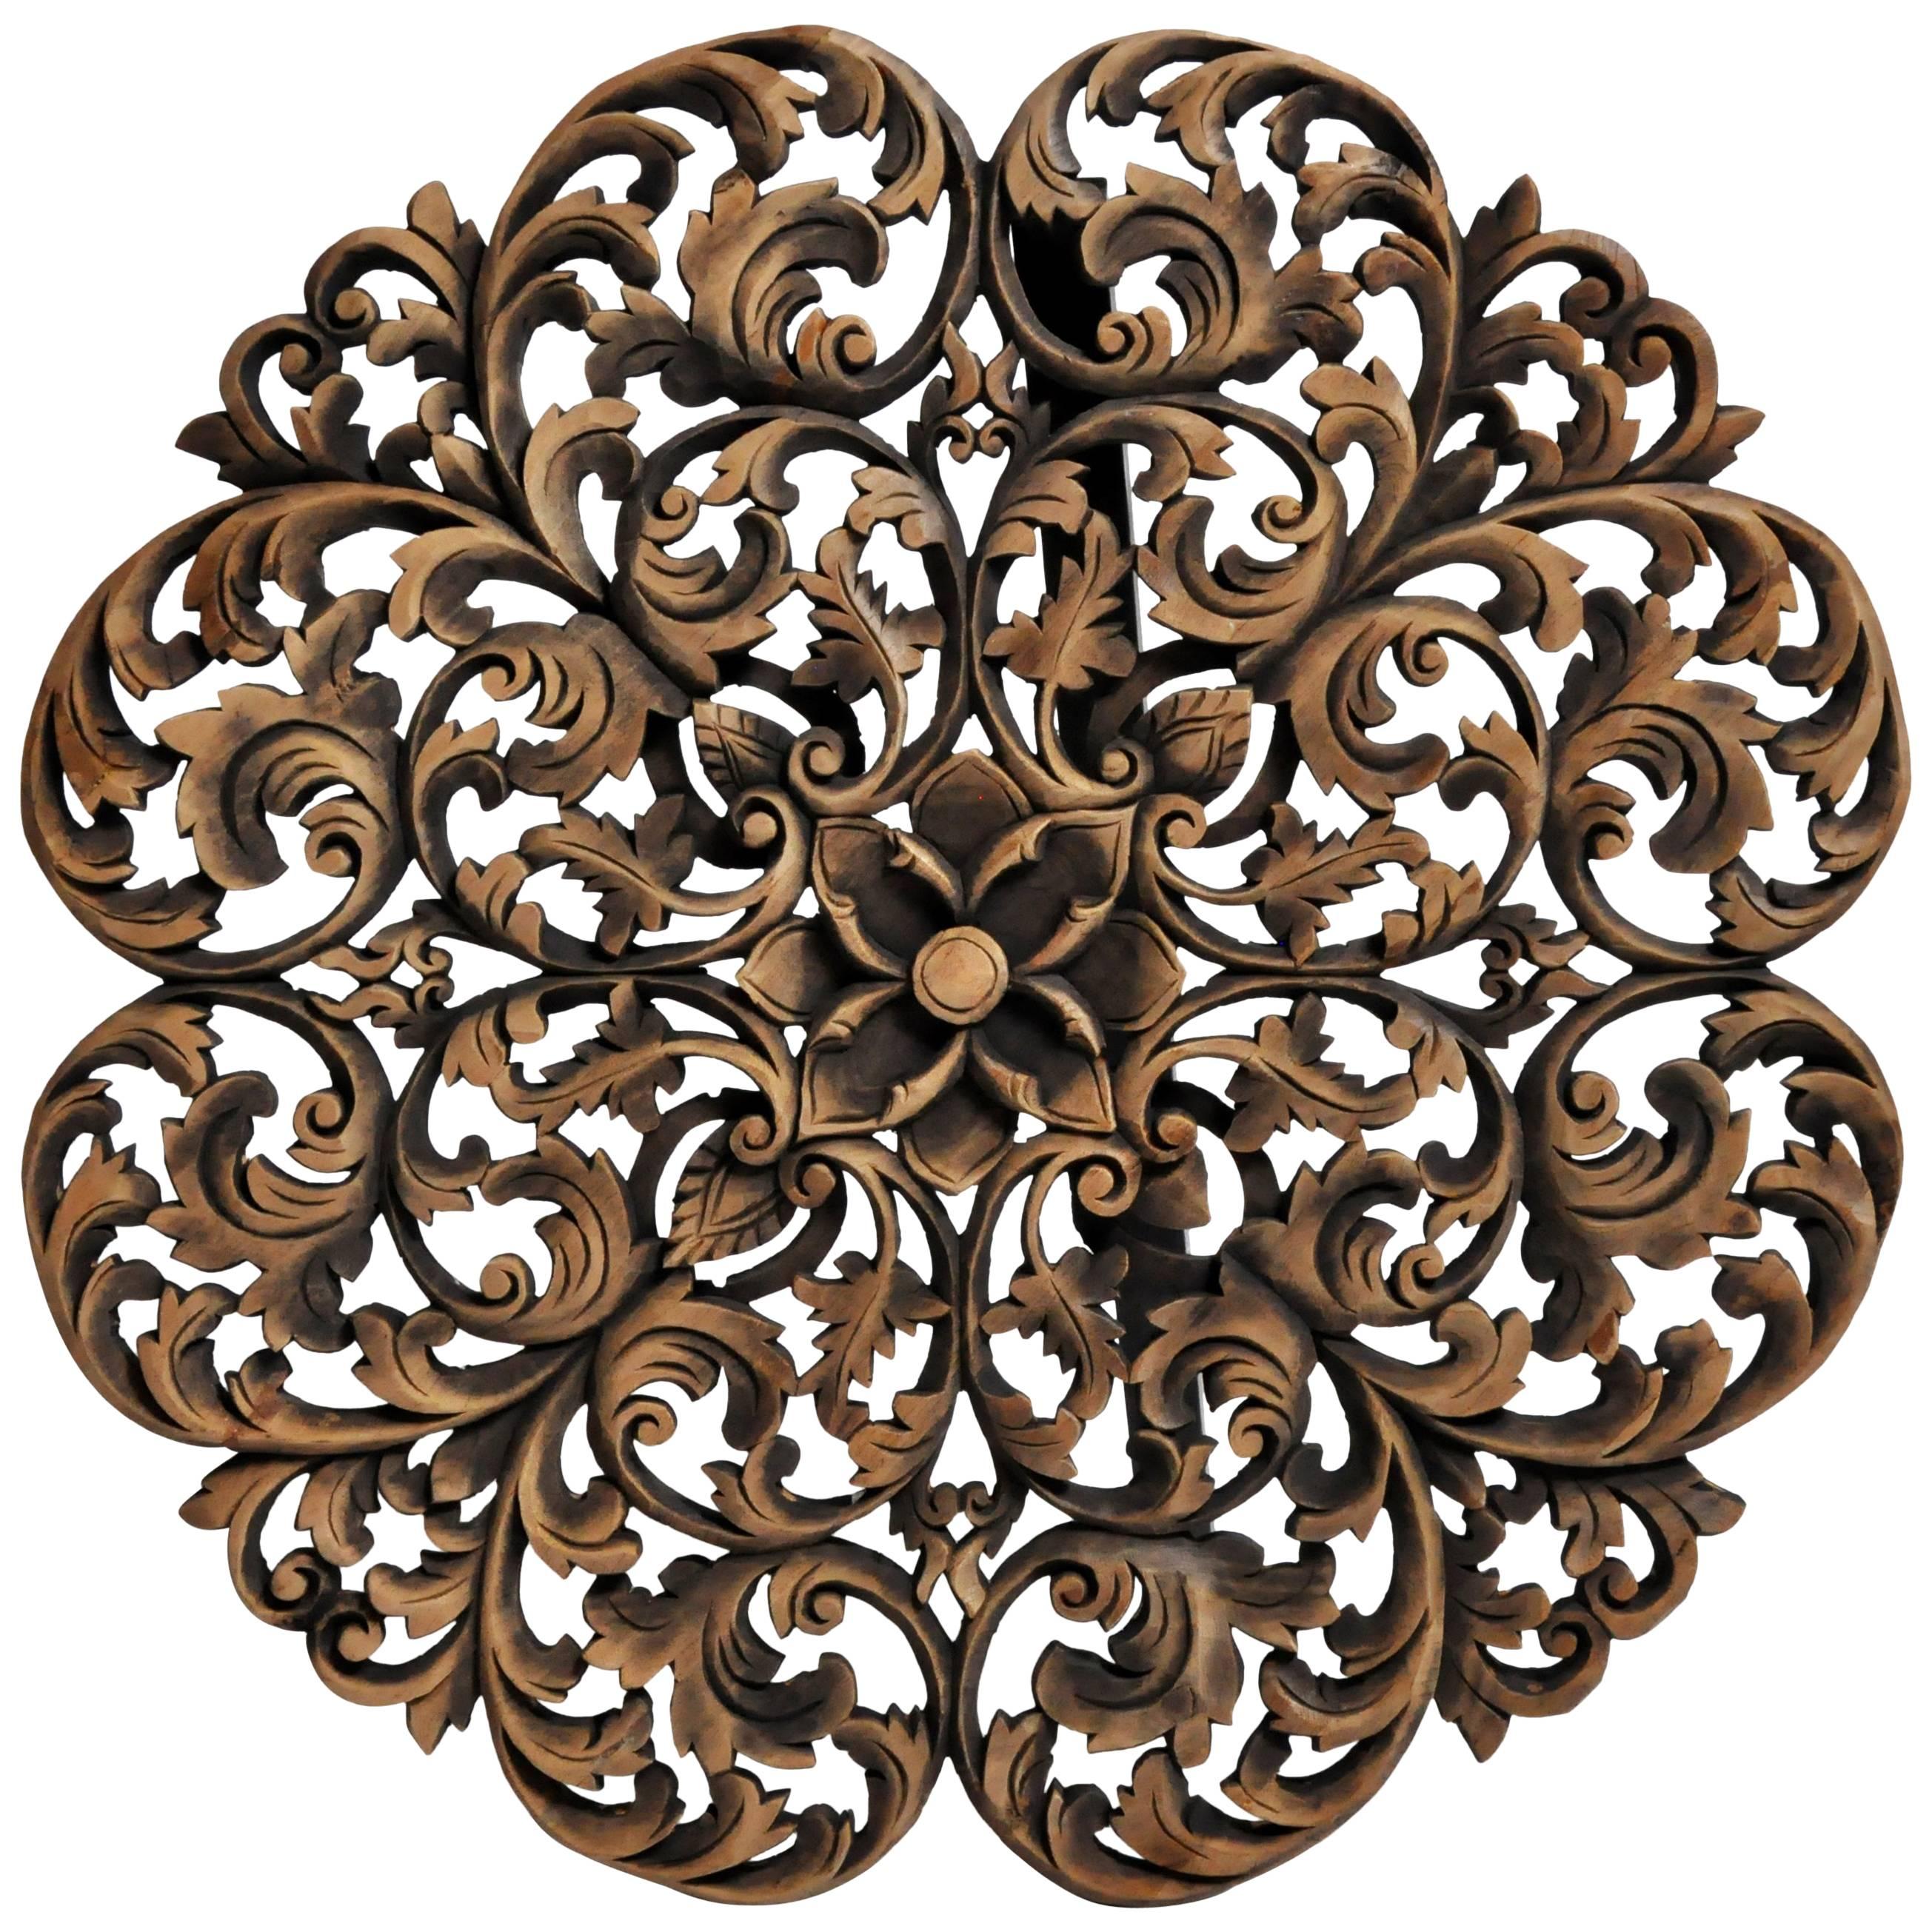 Southeast Asian Round Flower Wood Carving